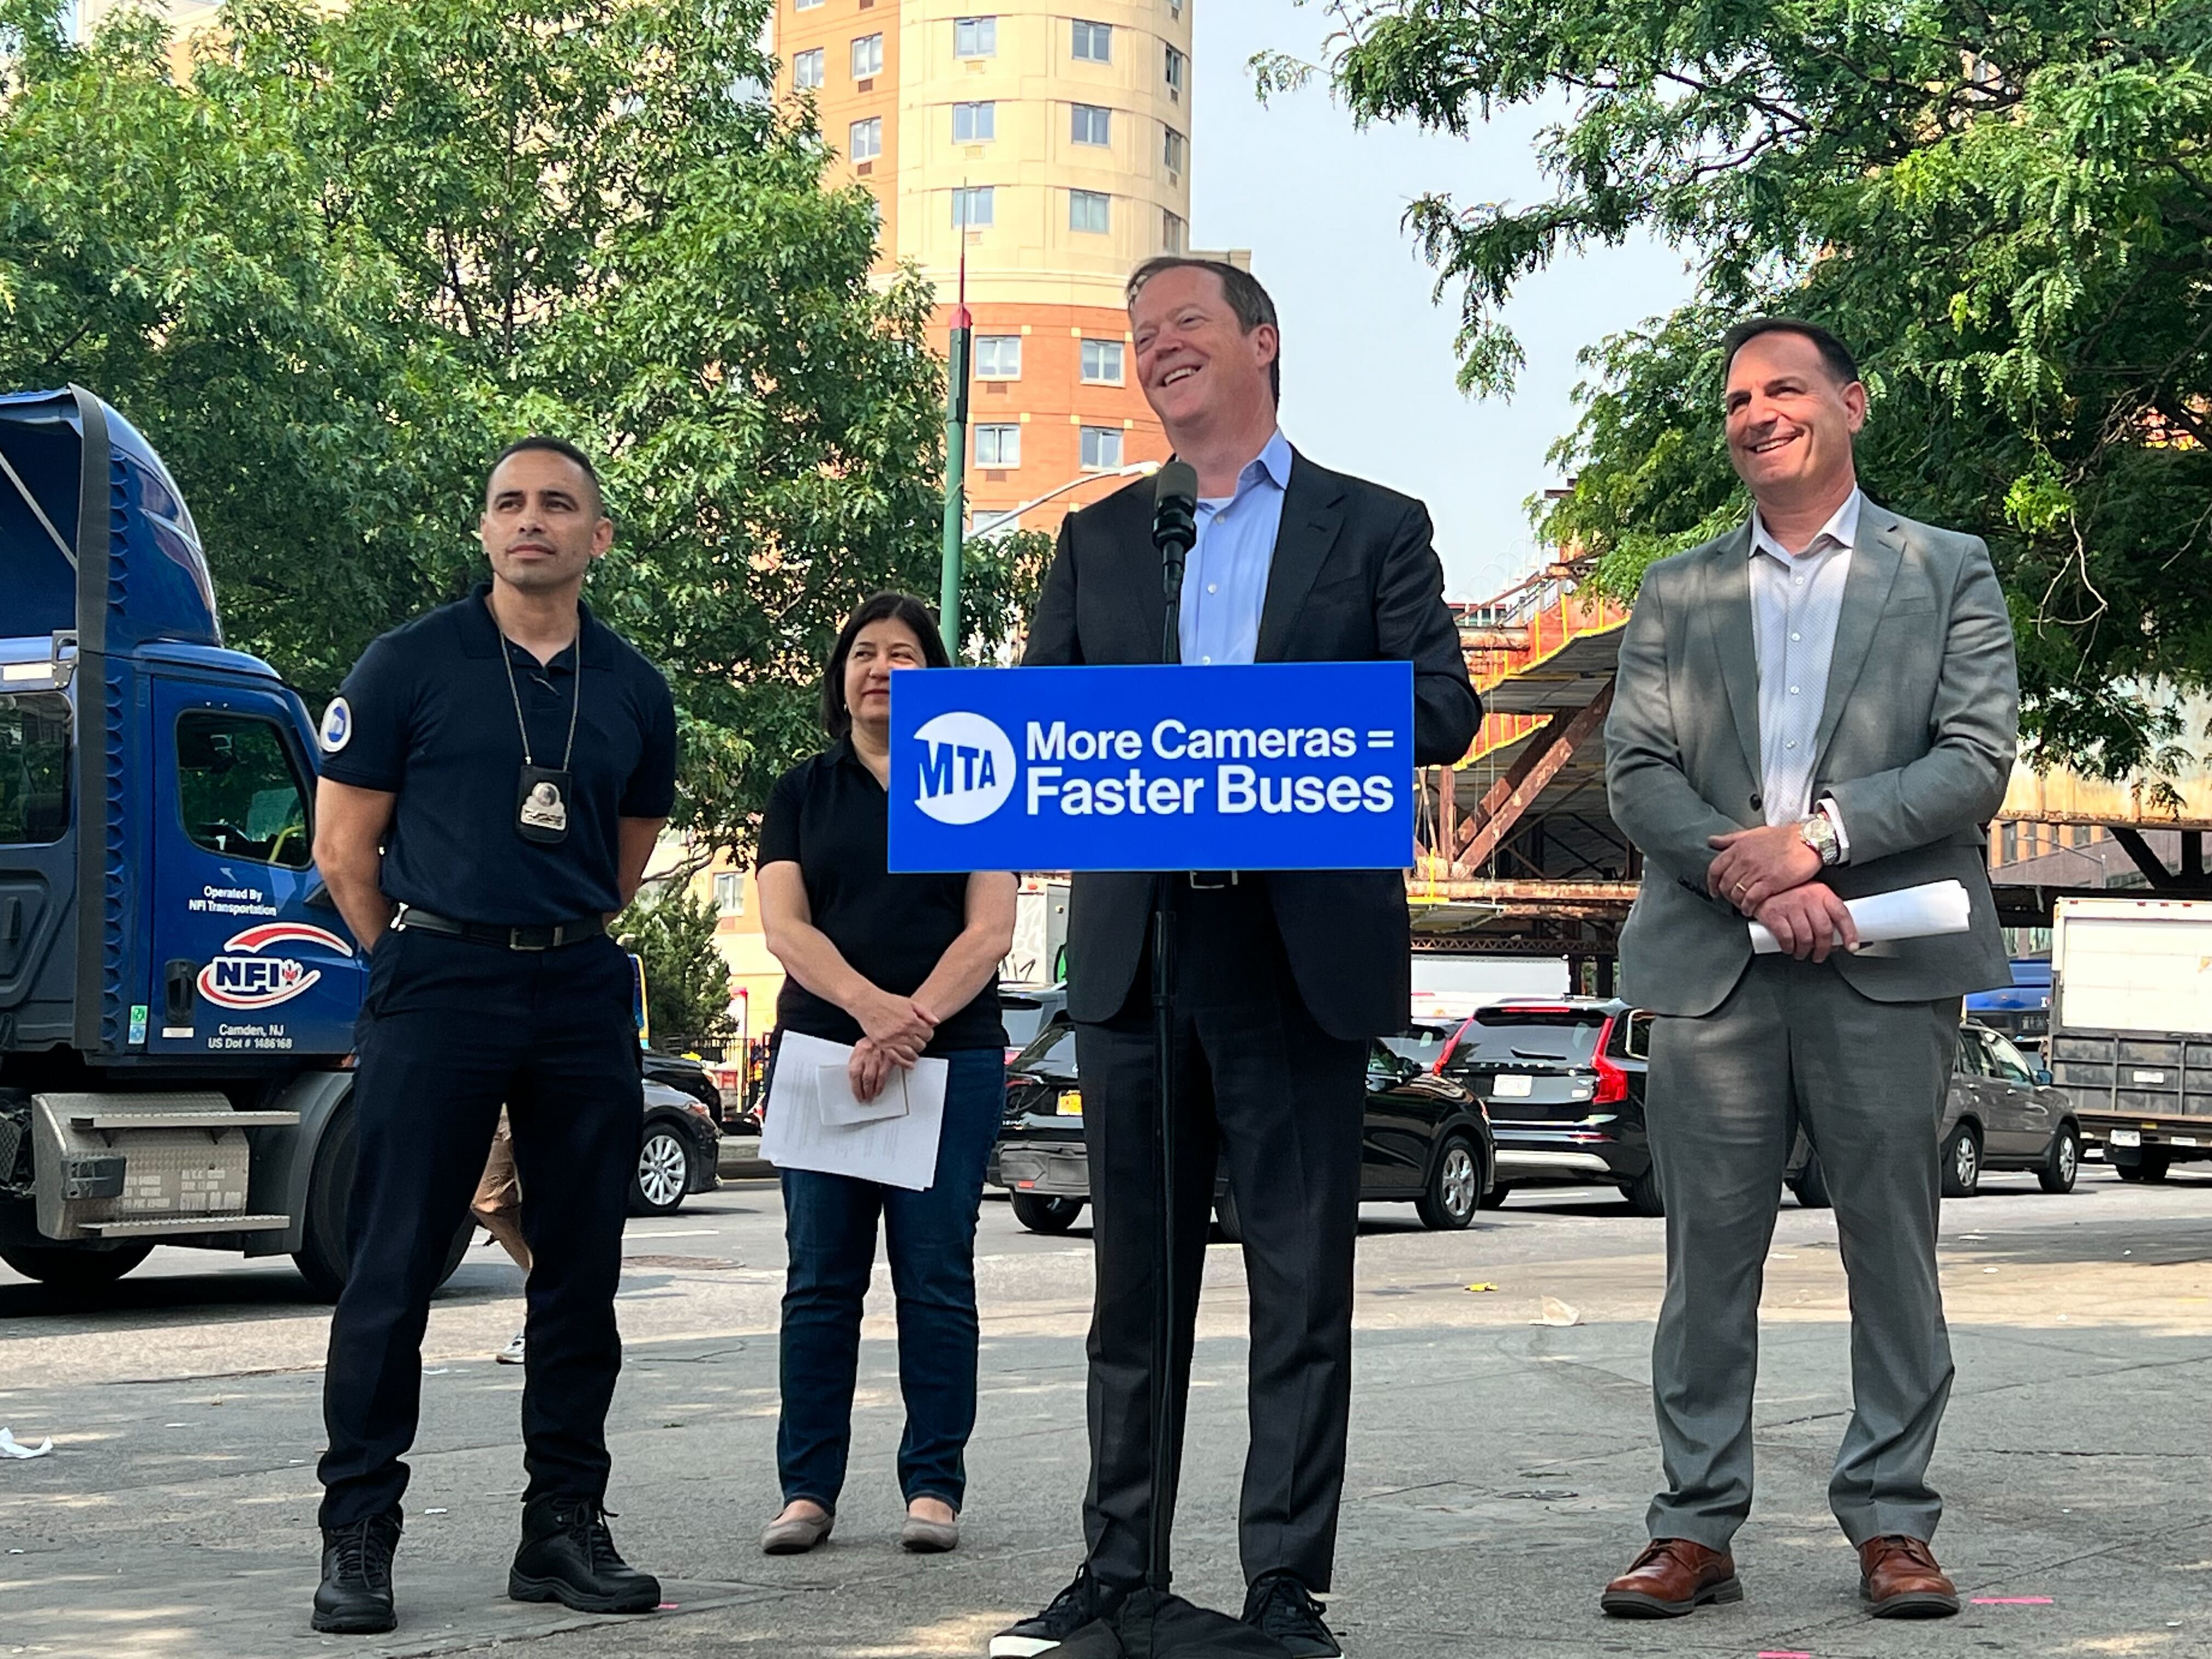 The MTA announced it activated automated bus lane enforcement (ABLE) cameras on the Bx36 bus route in the Bronx.